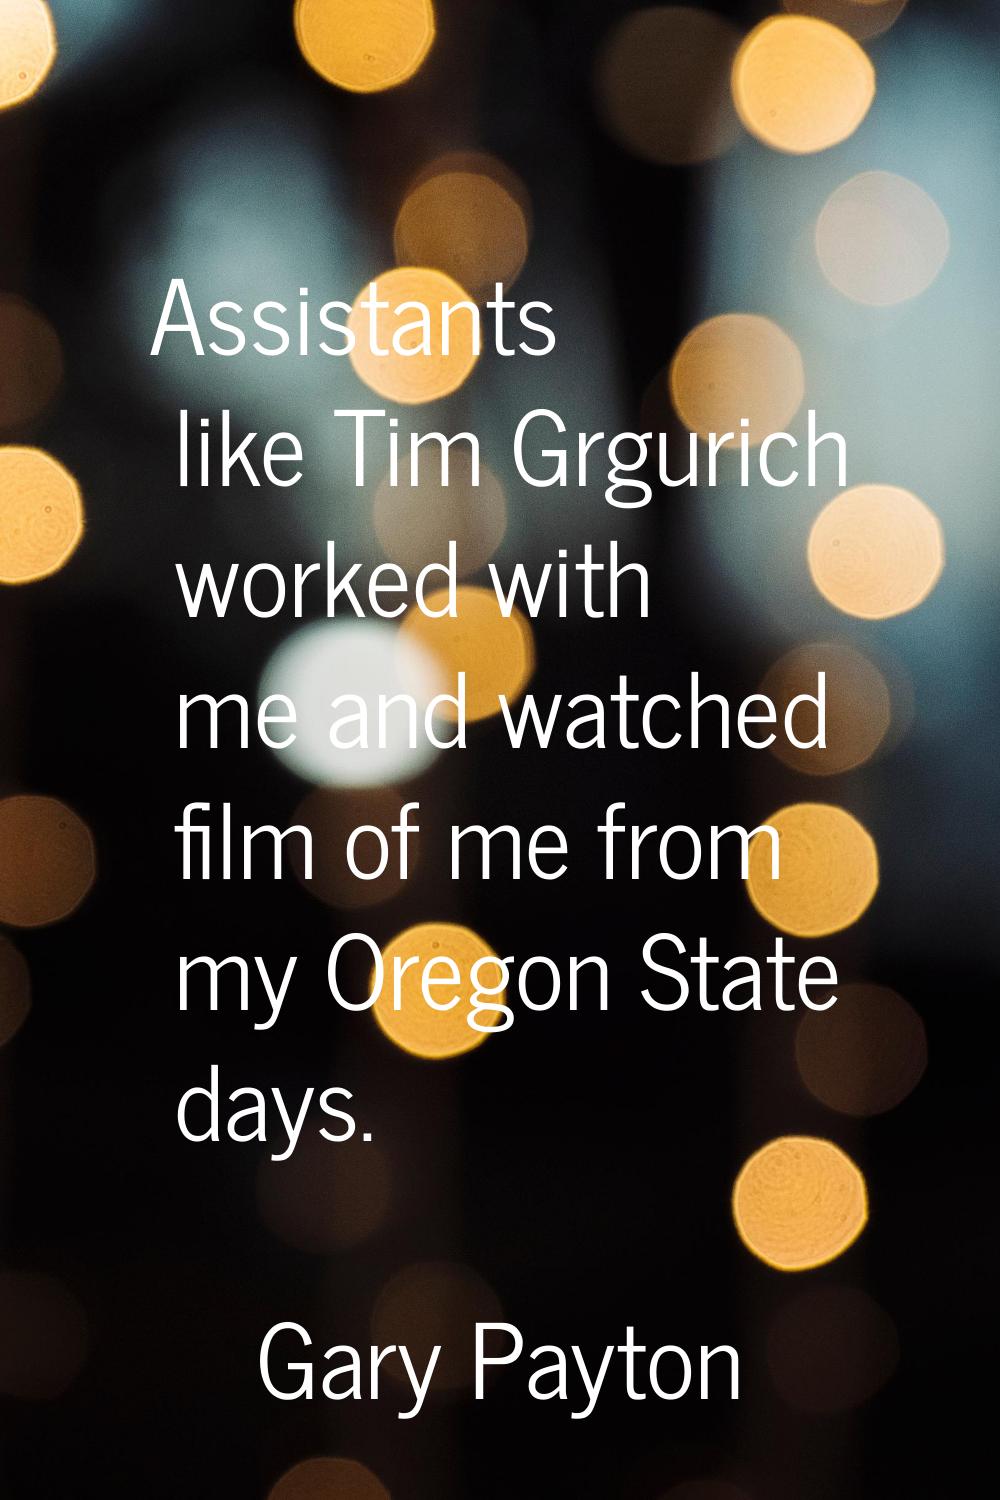 Assistants like Tim Grgurich worked with me and watched film of me from my Oregon State days.